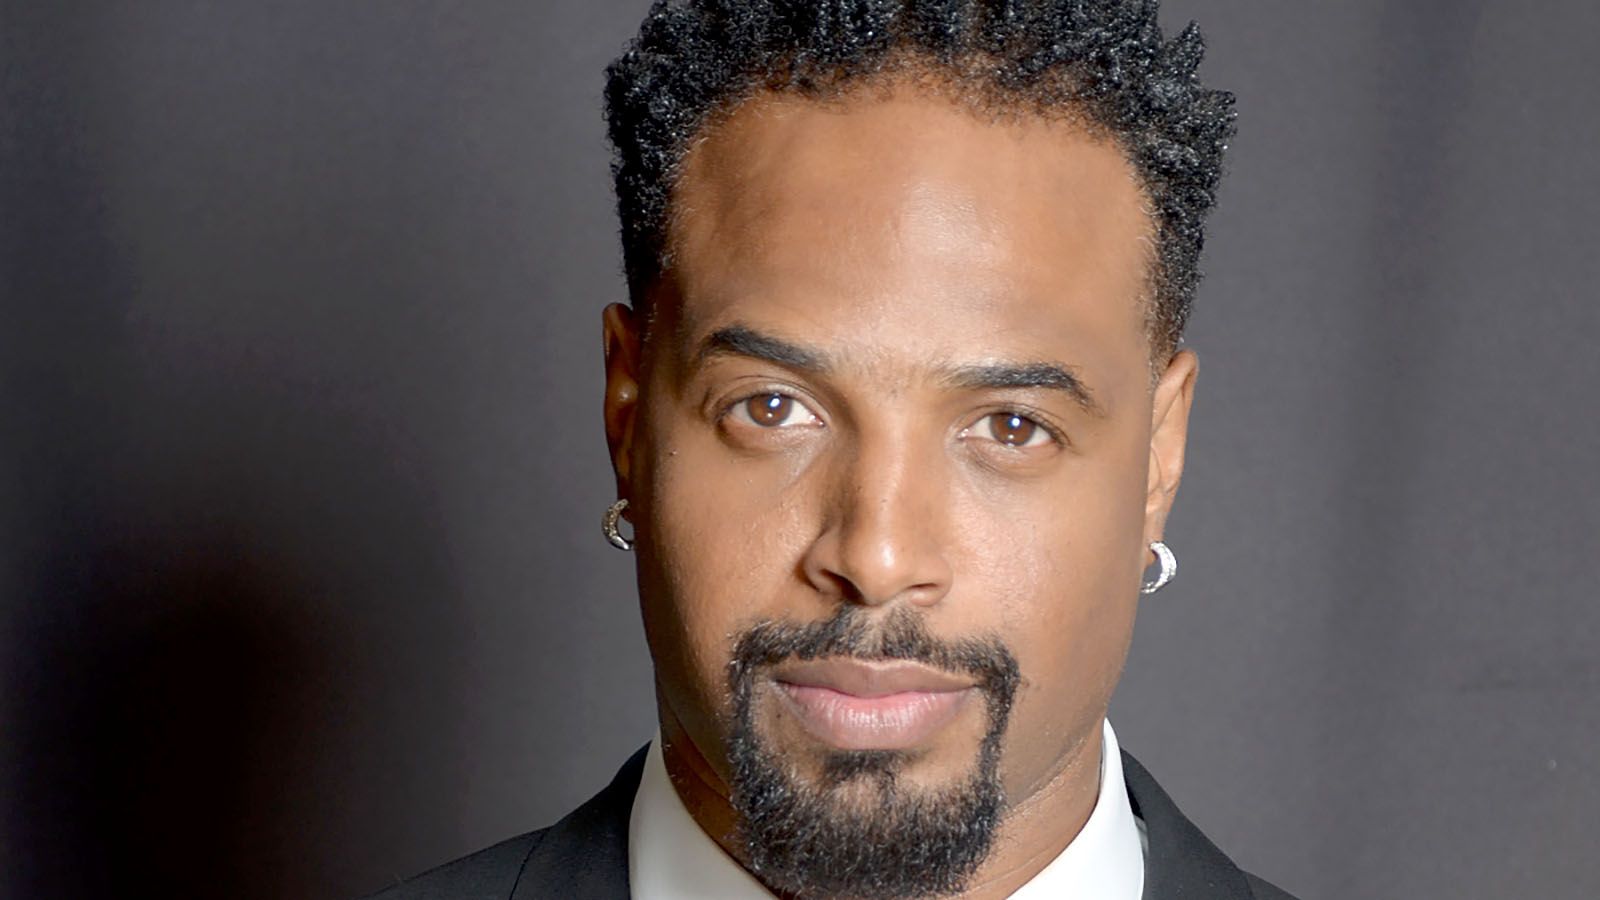 Shawn Wayans will be at Summit City Comedy Club on March 25-26.